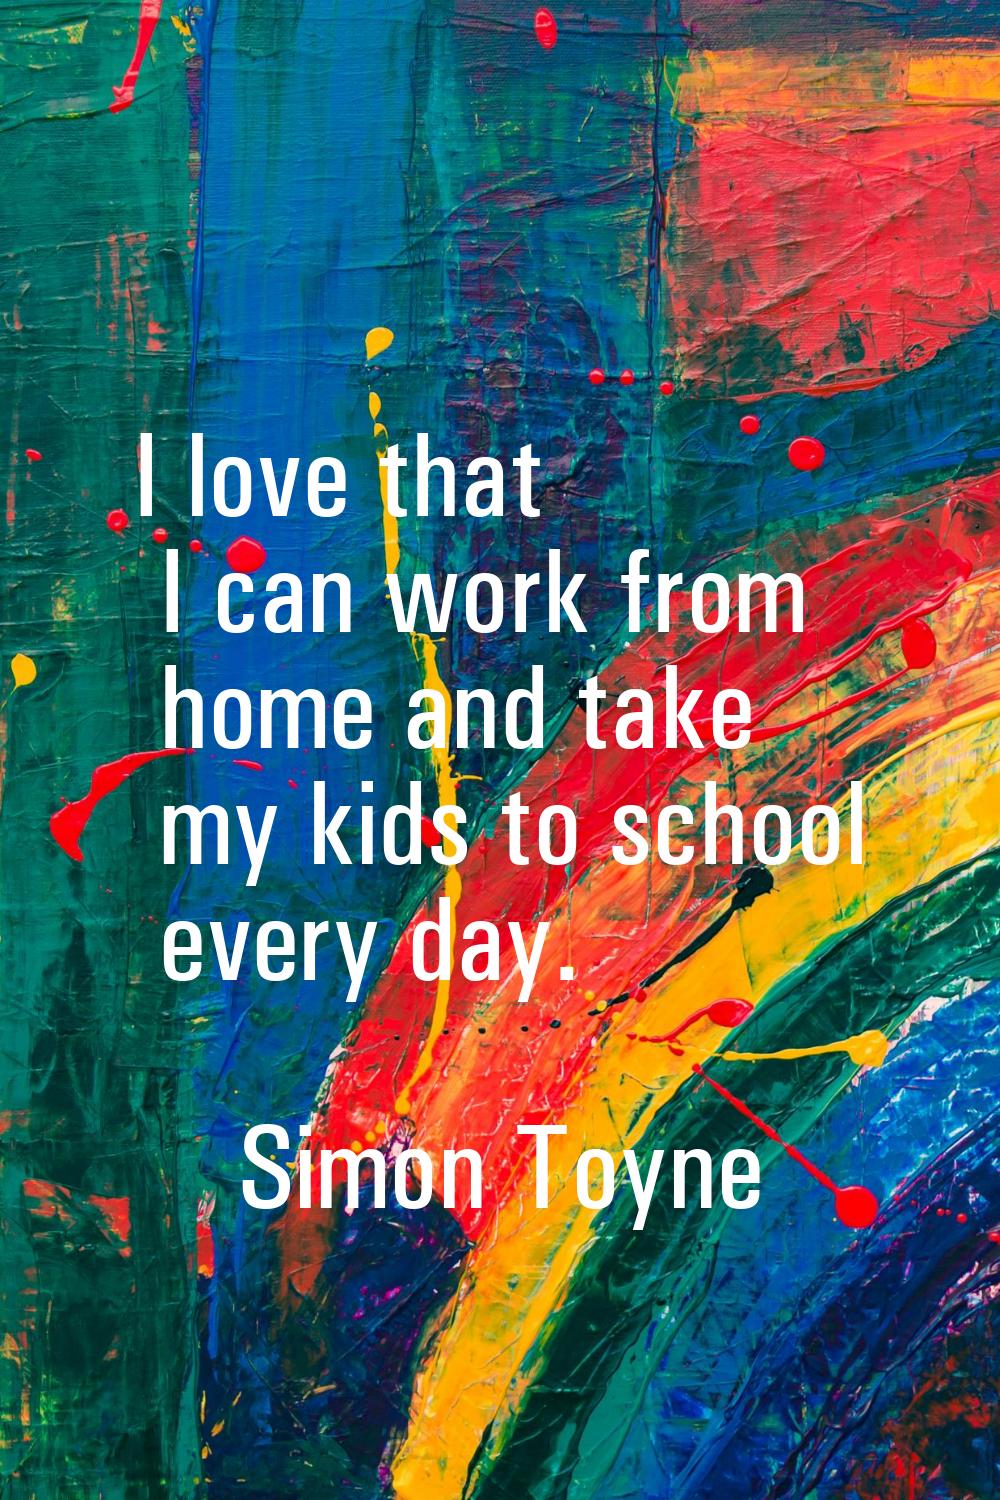 I love that I can work from home and take my kids to school every day.